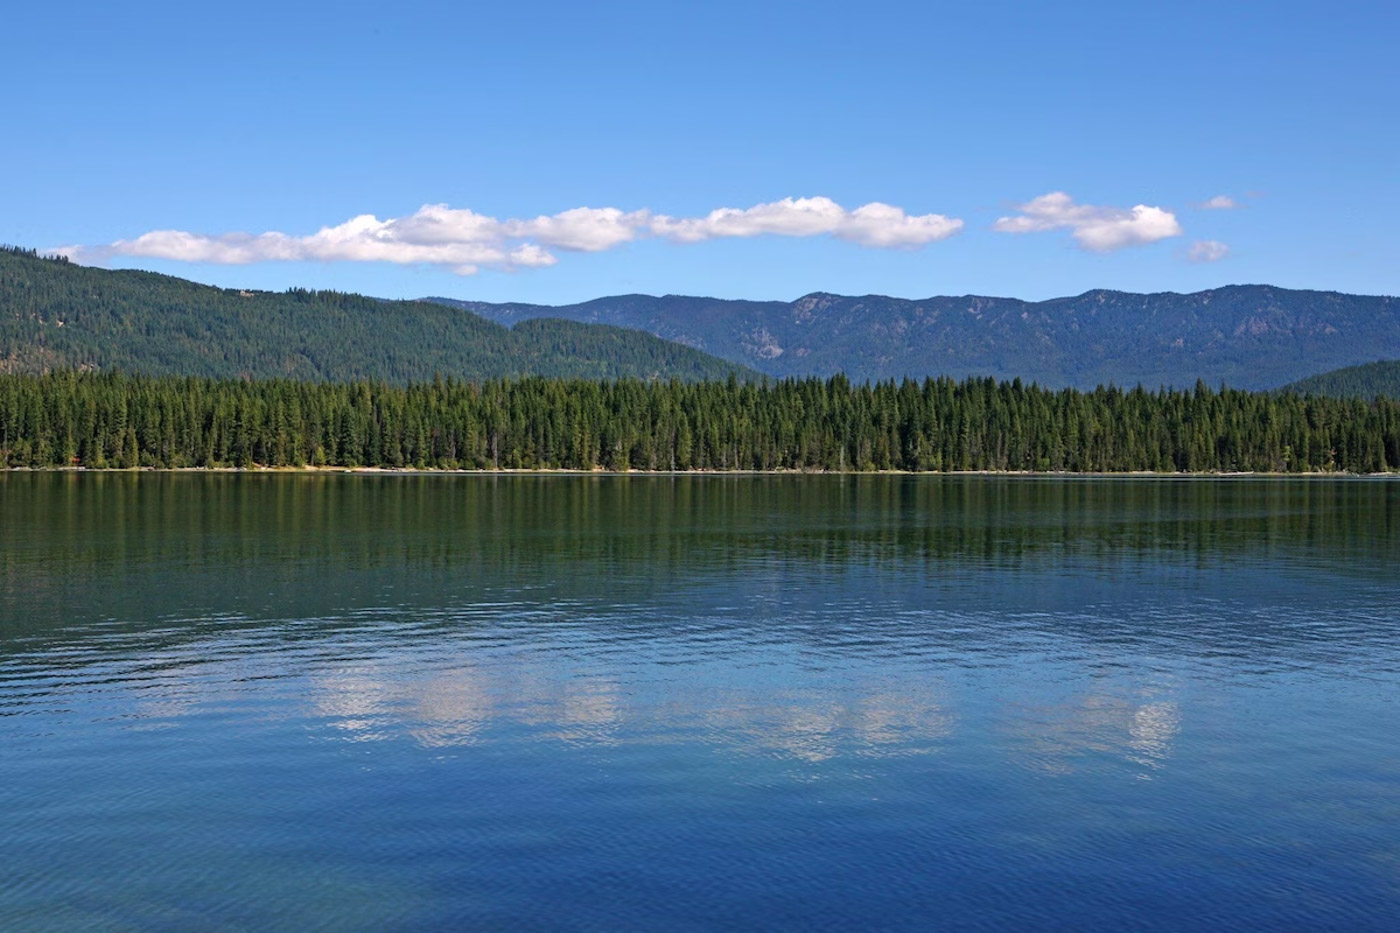 View across the blue waters of Lake Wenatchee and the forests and mountains beyond.